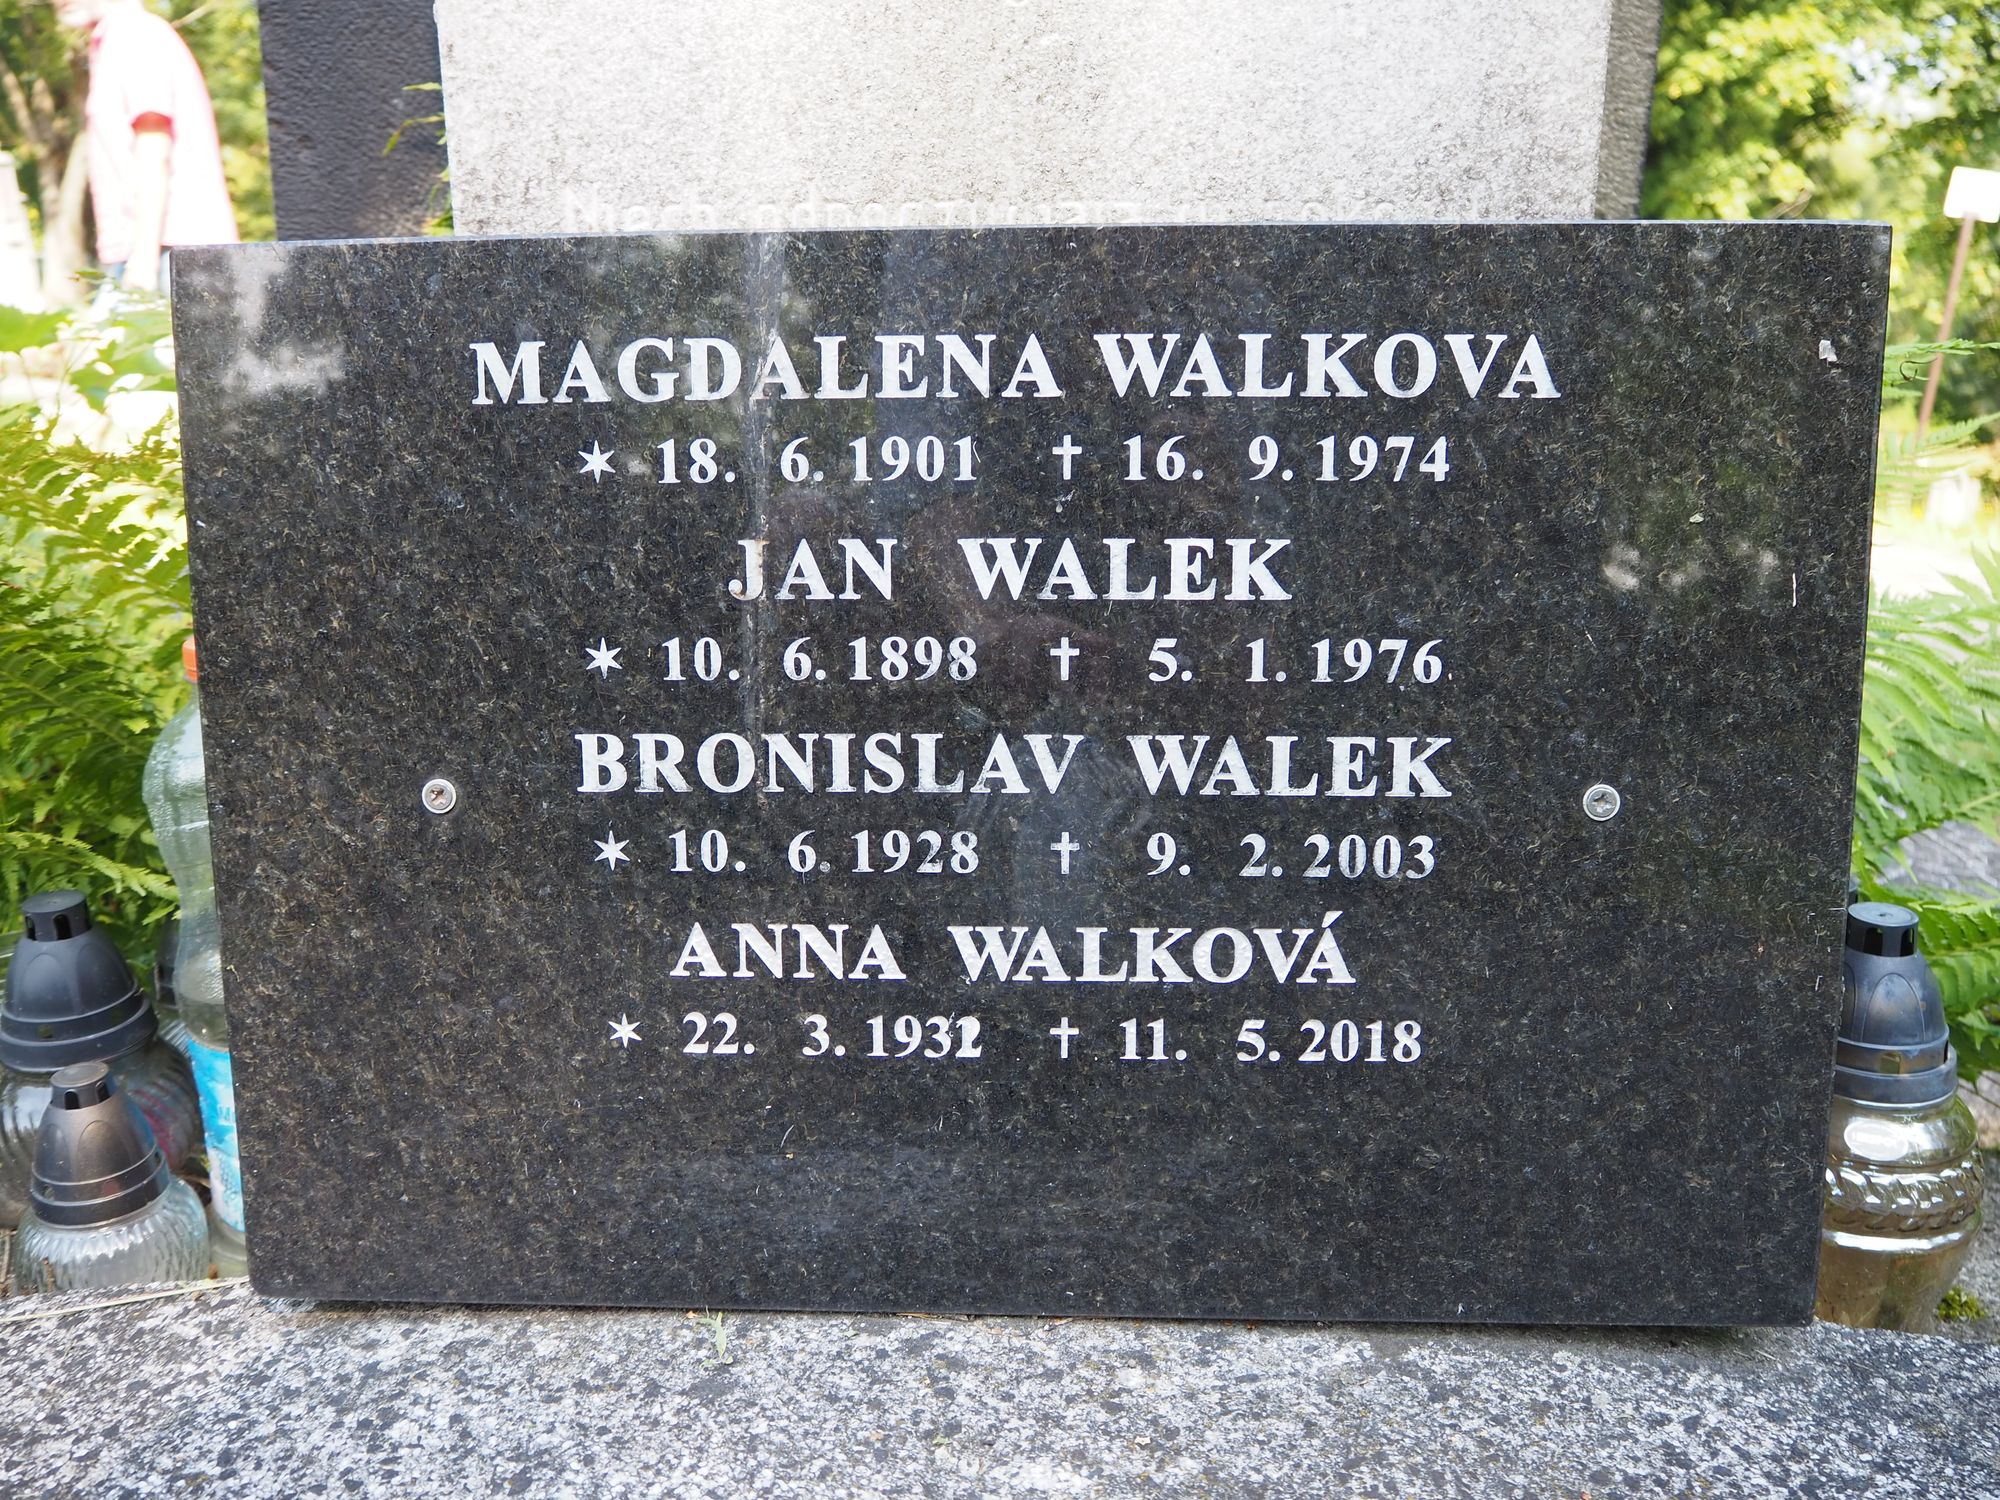 Secondary plaque from the gravestone of the Szeliga and Walek families, Karviná Doły cemetery, as of 2022.